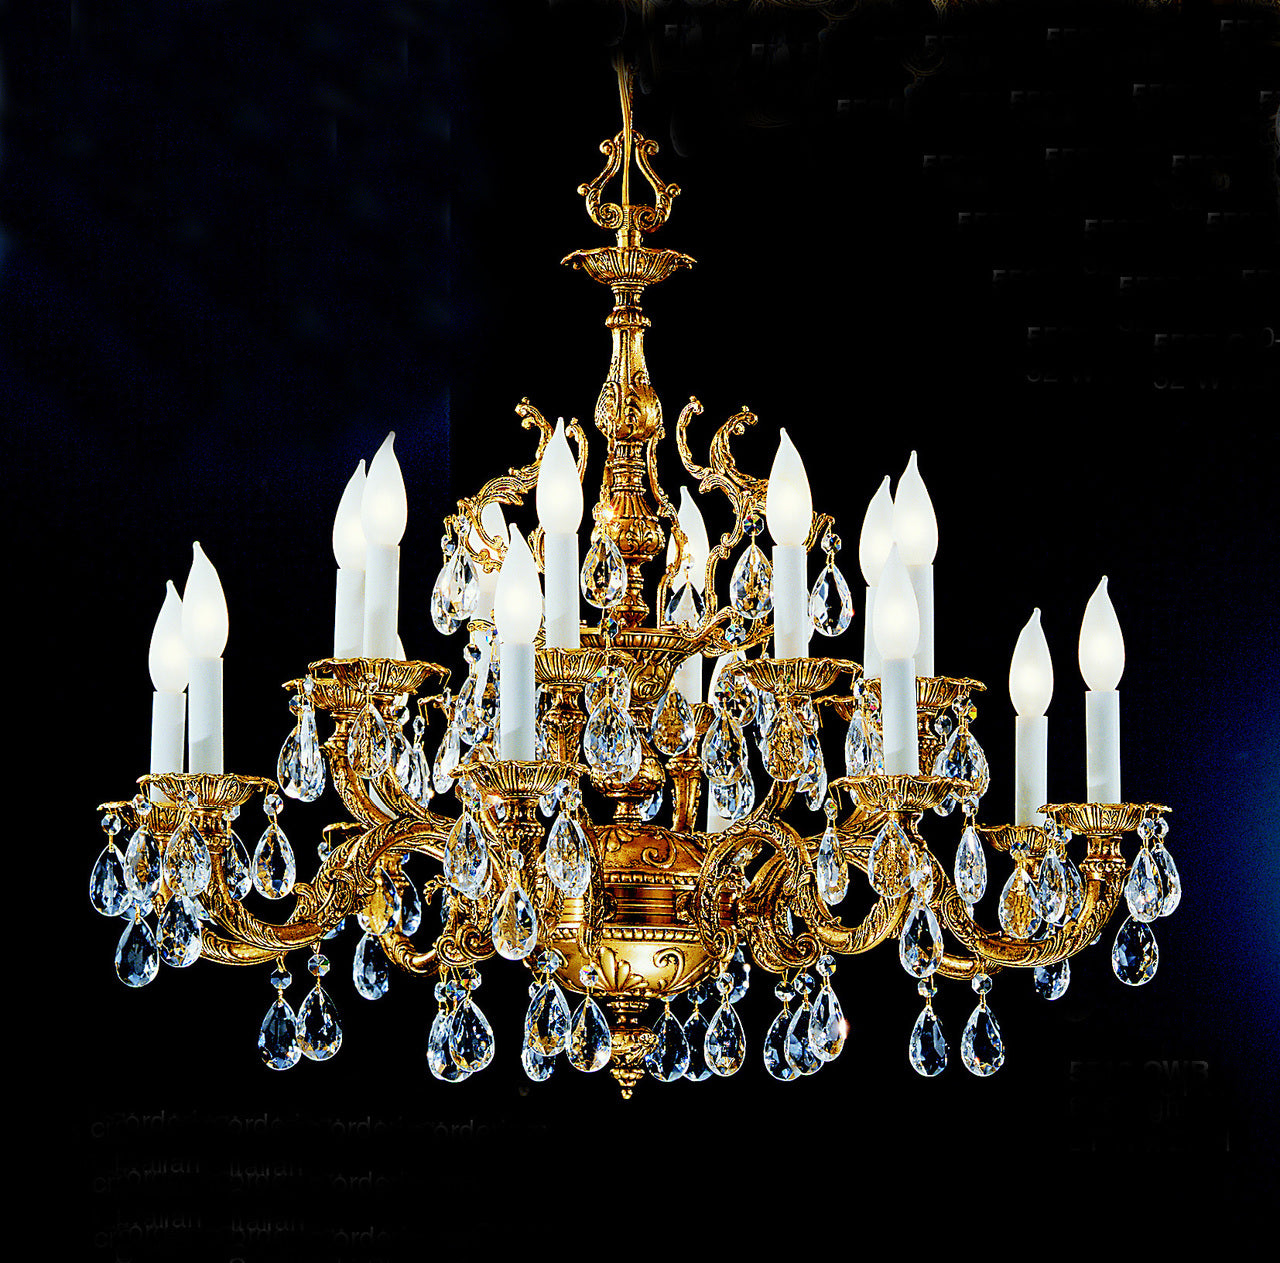 Classic Lighting 5516 OWB I Barcelona Crystal/Cast Brass Chandelier in Olde World Bronze (Imported from Spain)